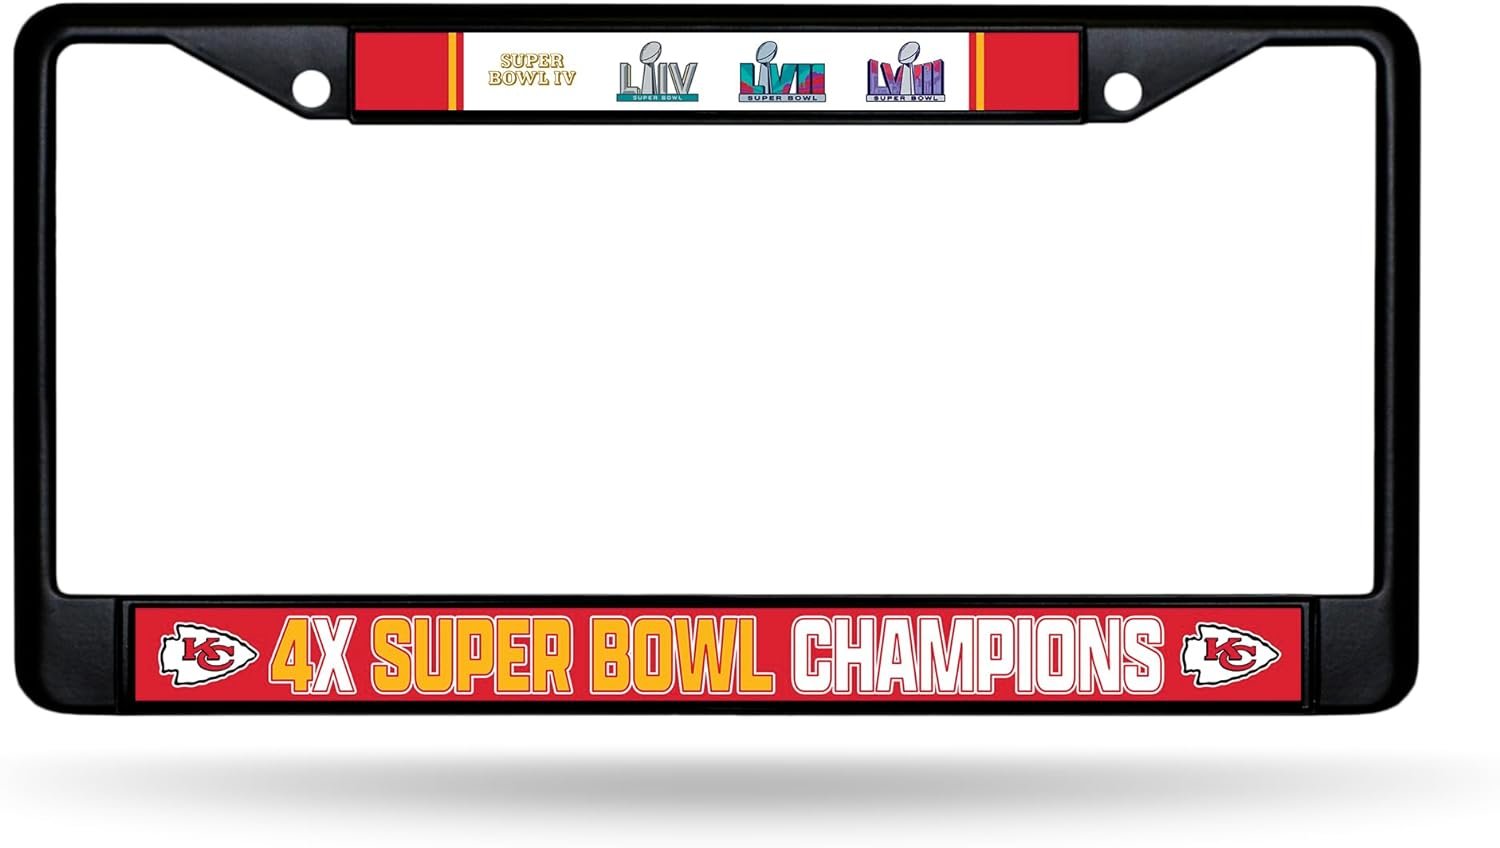 Kansas City Chiefs 4X Super Bowl Champions Black Chrome Metal License Plate Frame Tag Cover, Decal Inserts, 12x6 Inch